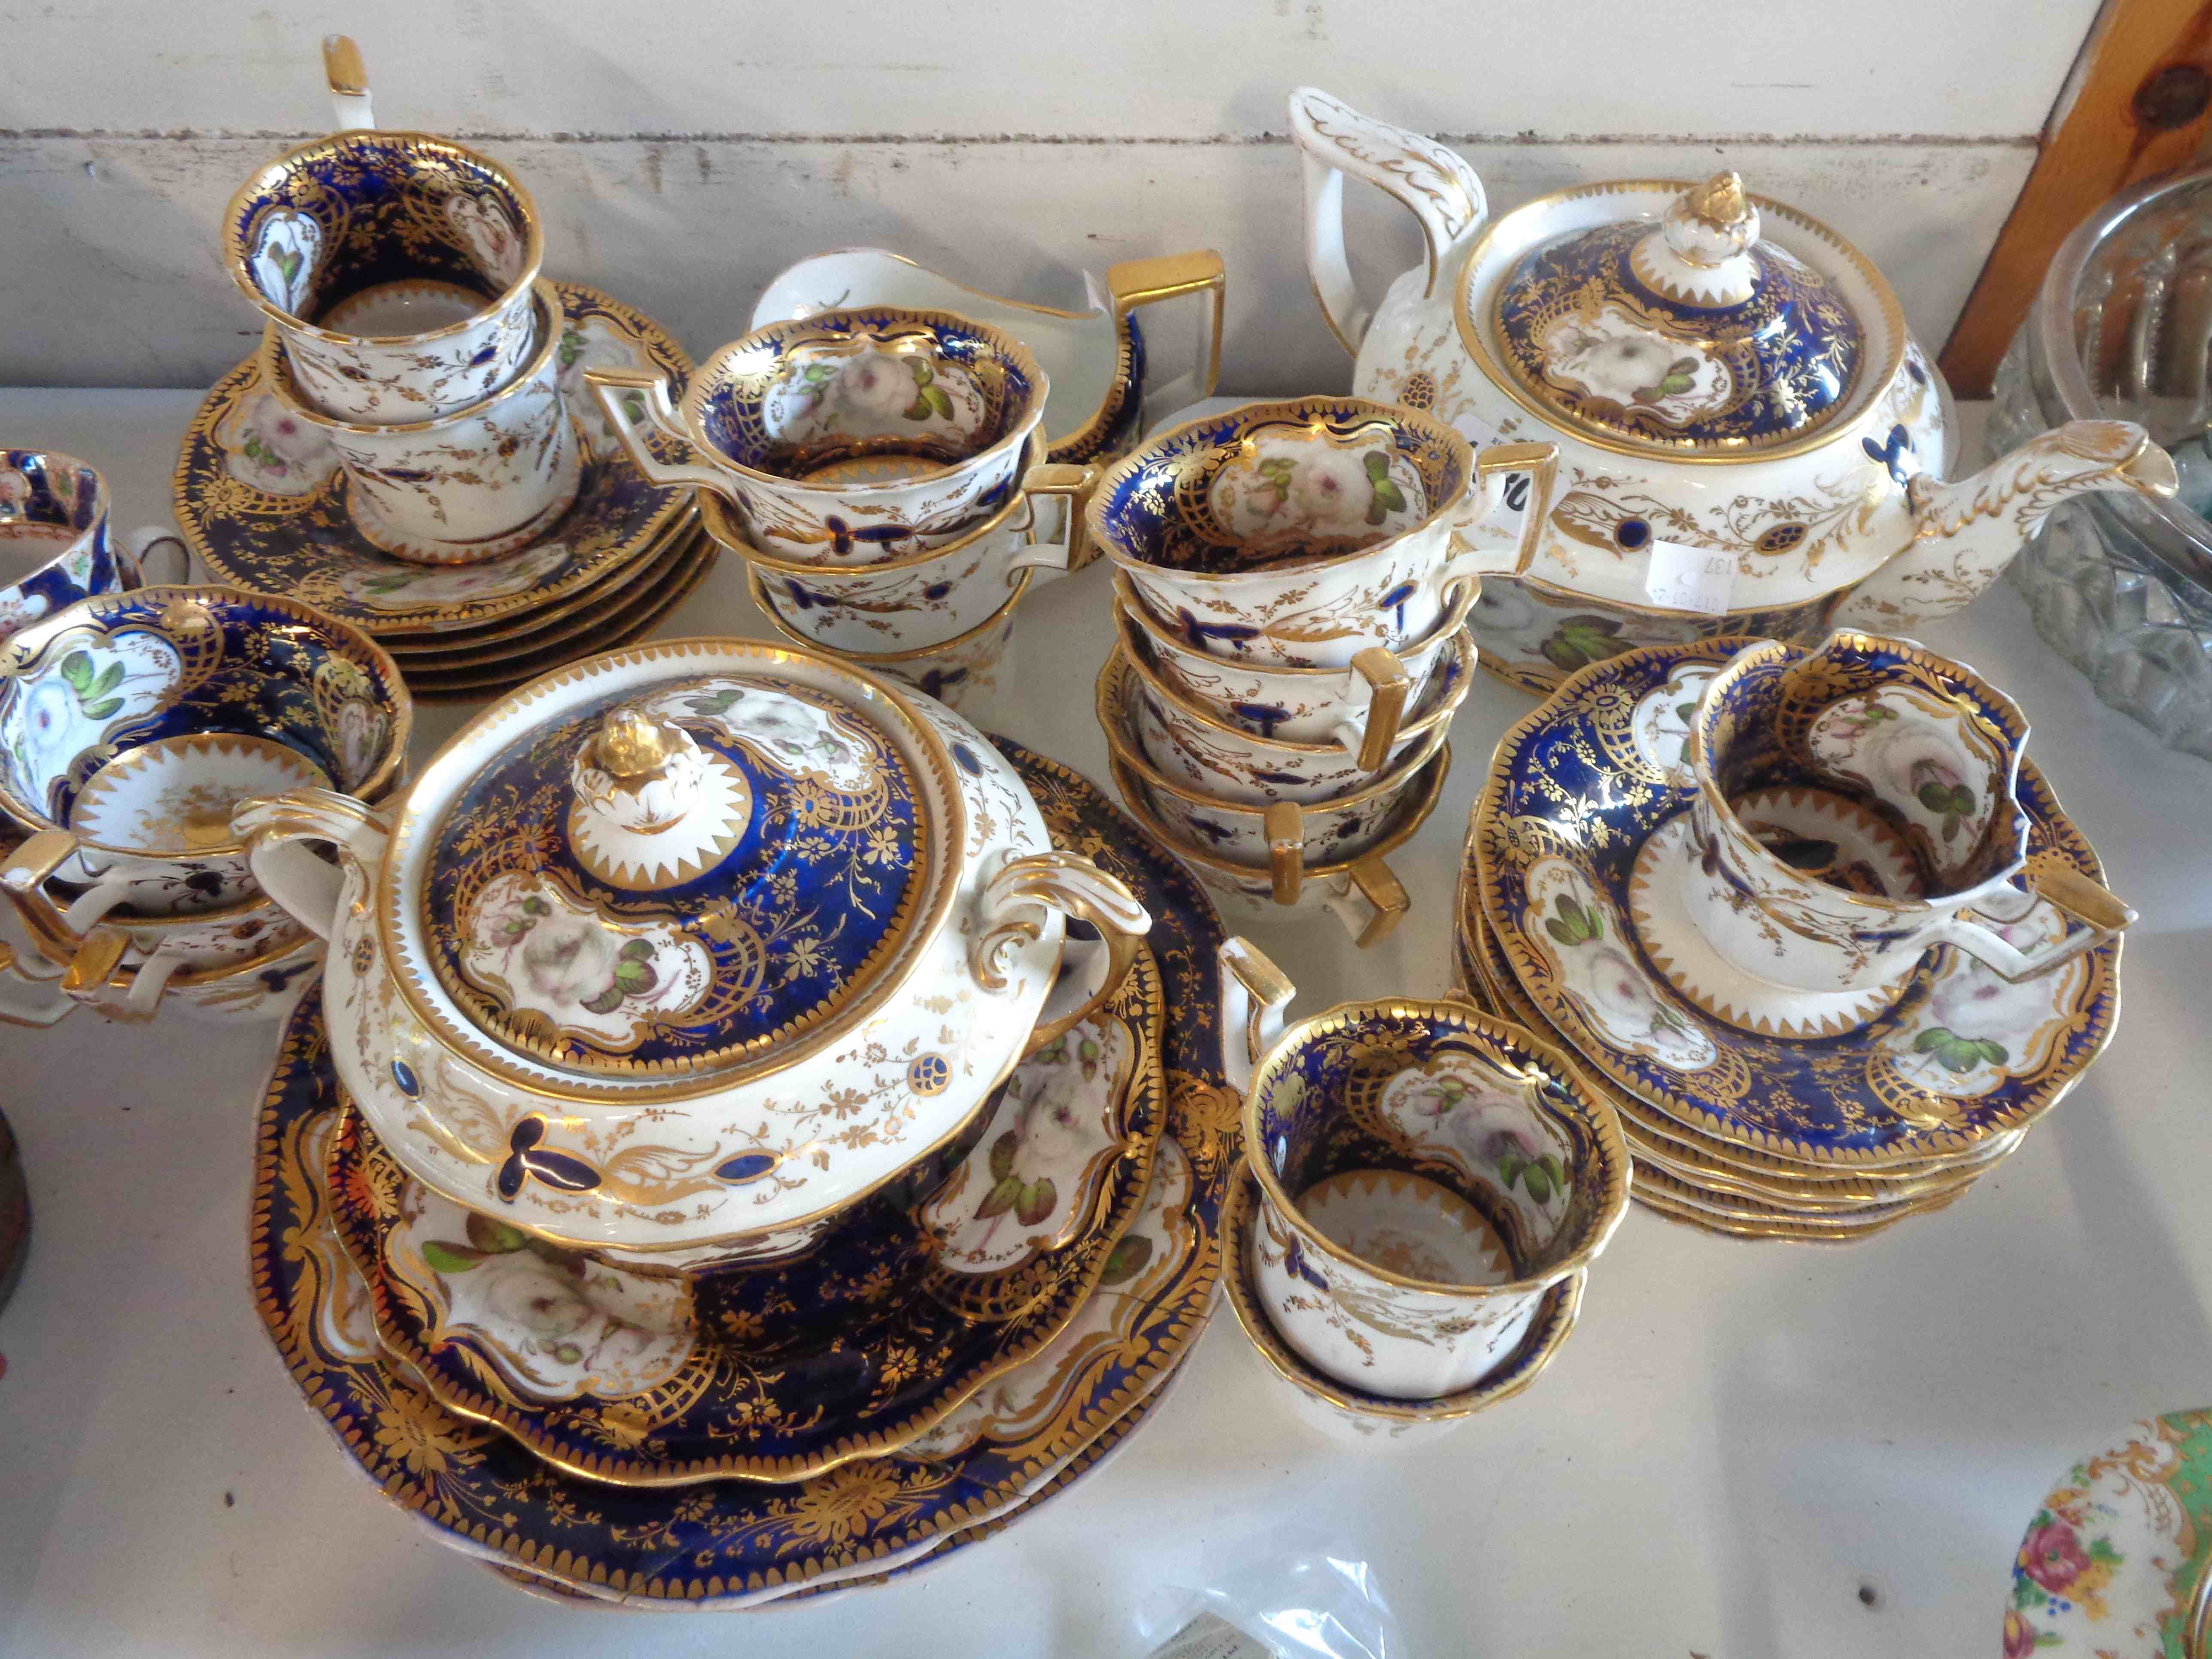 An early 19th Century bone china part tea set in the Rockingham manner, decorated with hand